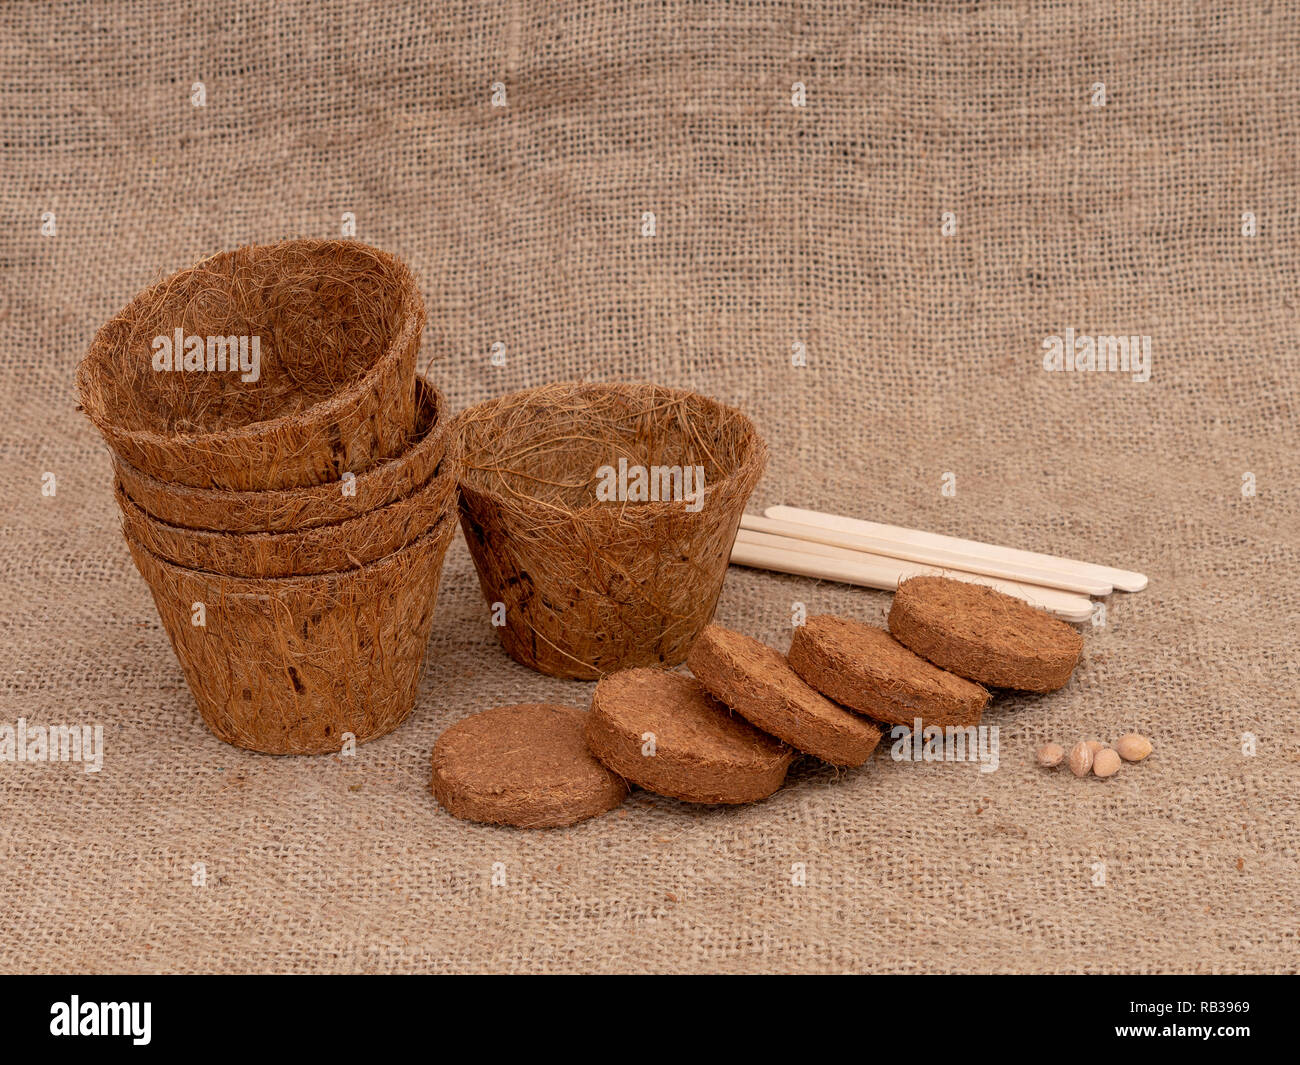 Coir plant pots and compressed compost on hessian. With wooden plant labels. Environmentally friendly spring gardening. Stock Photo